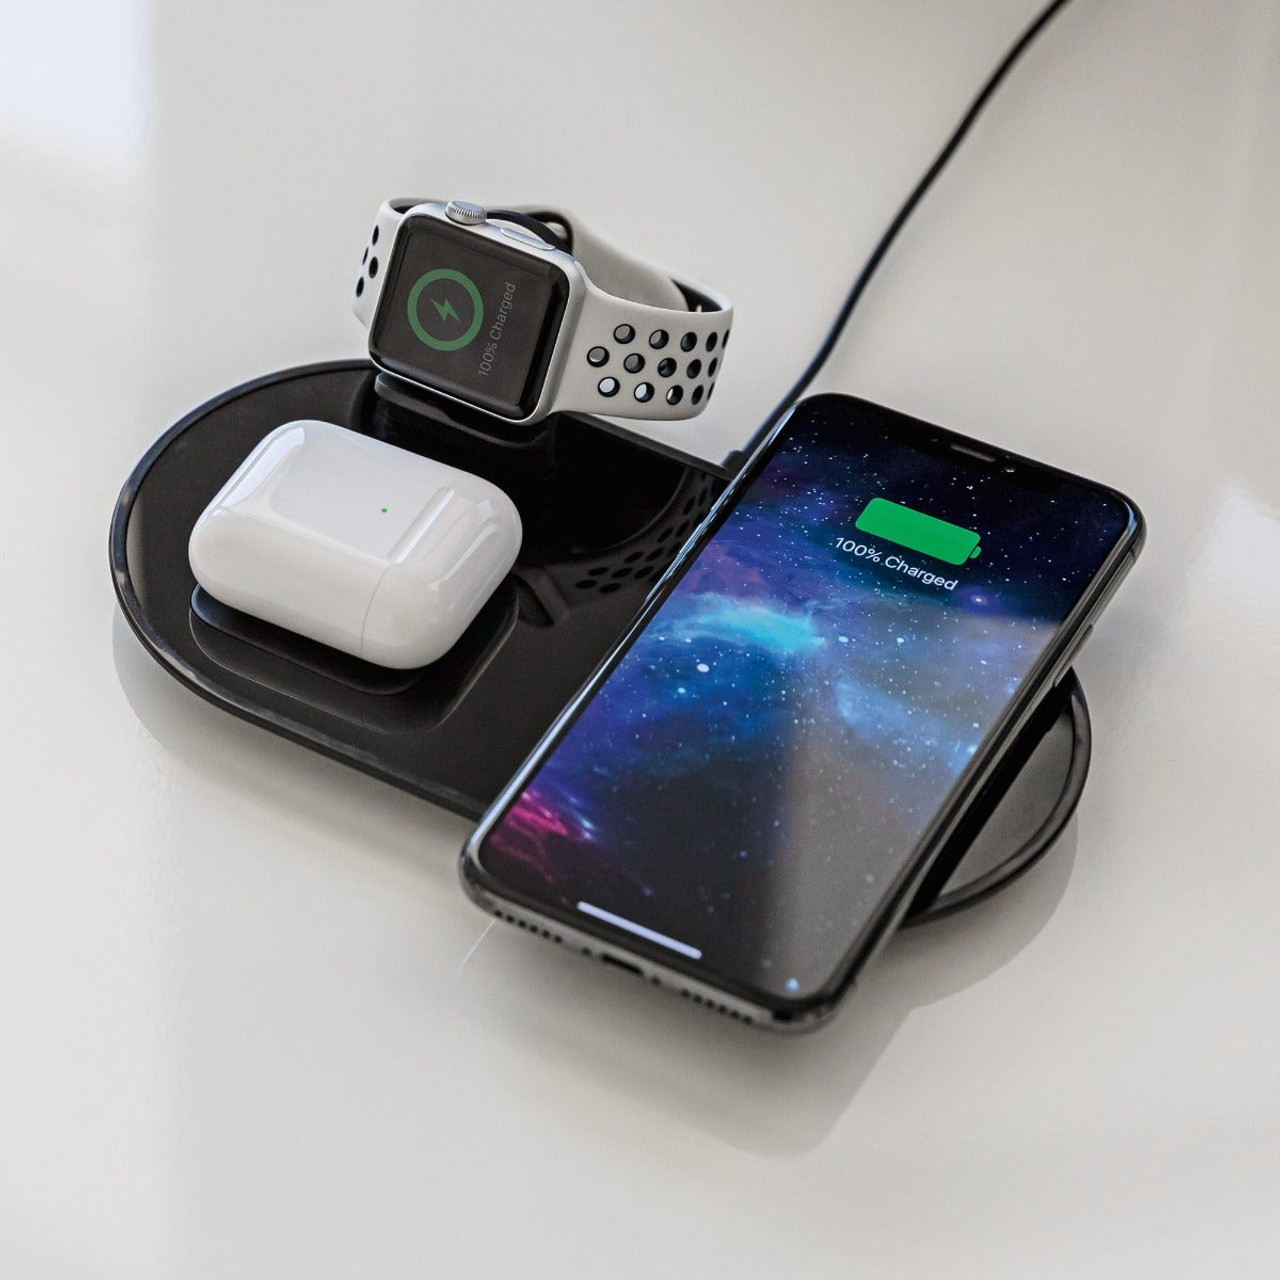 3-in-1 wireless charging pad